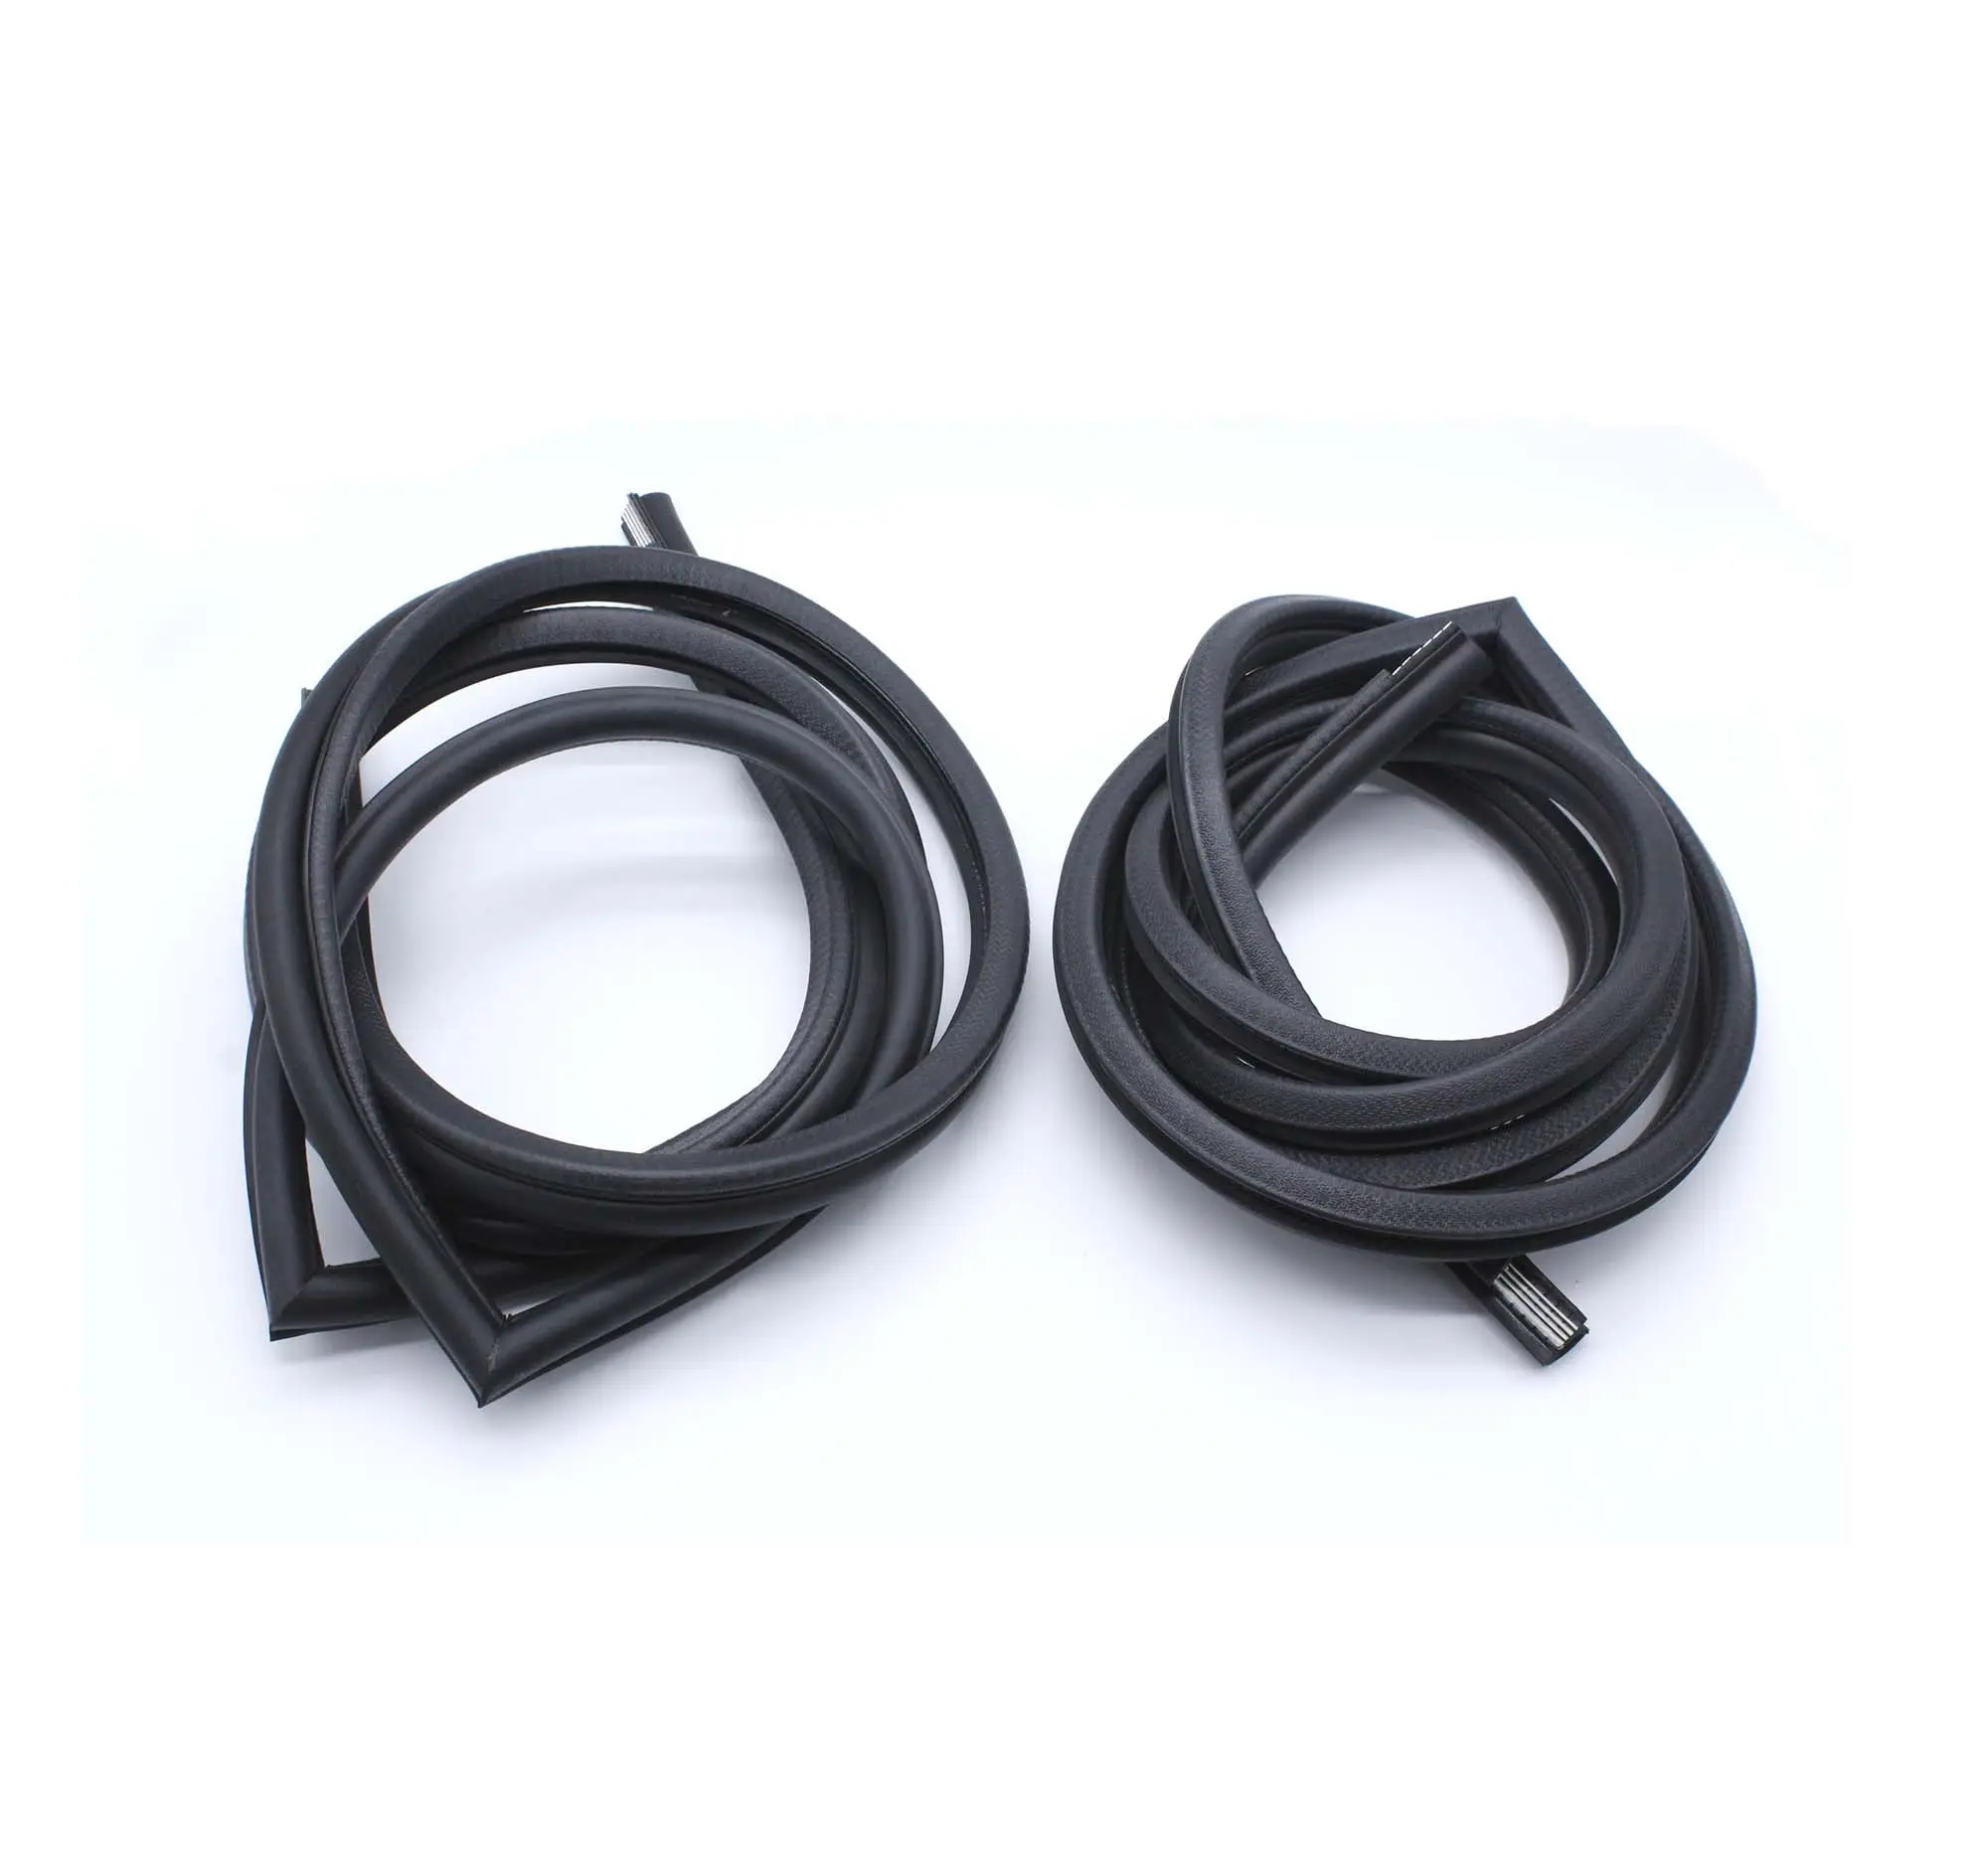 New Pair of Front Door Rubber Weather Seals for Land Rover Defender BR1037+BR1038 VA663 Left & Right Hand Side (LHS & RHS)